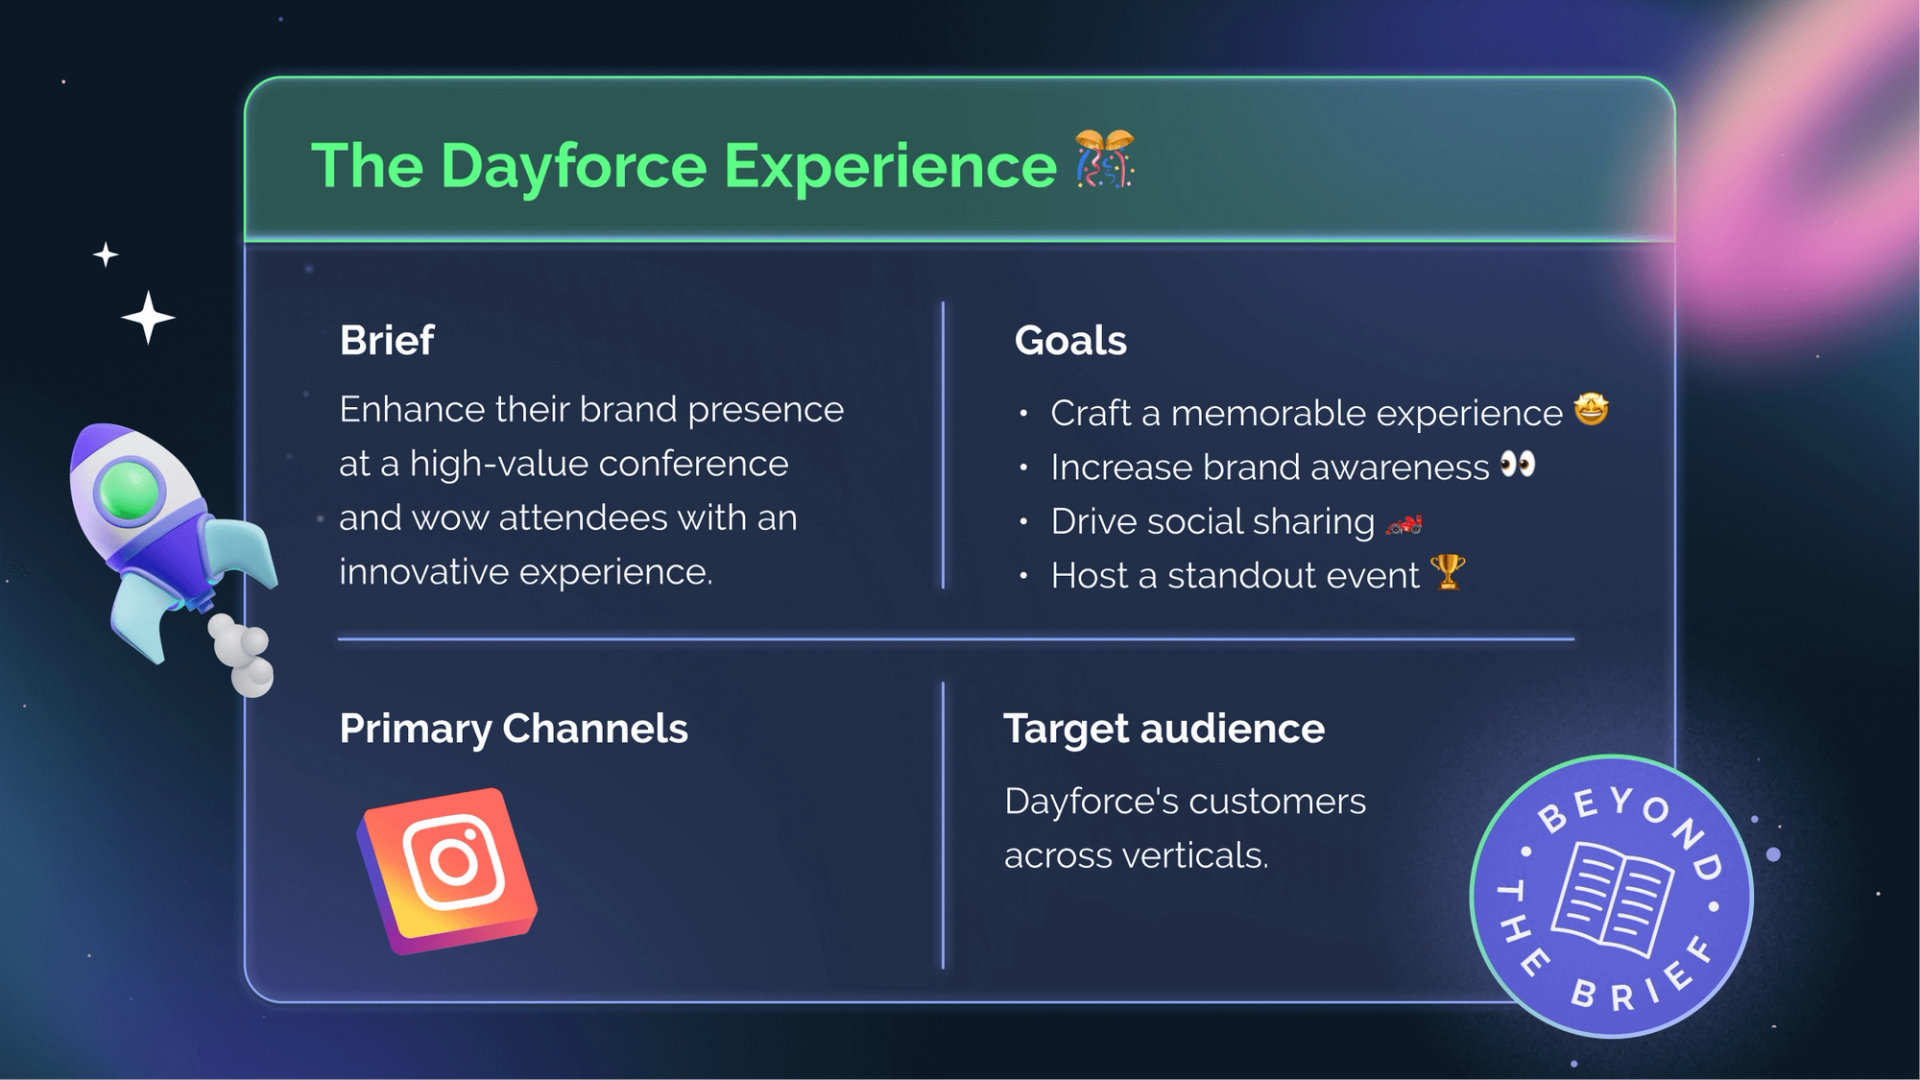 The Dayforce Experience